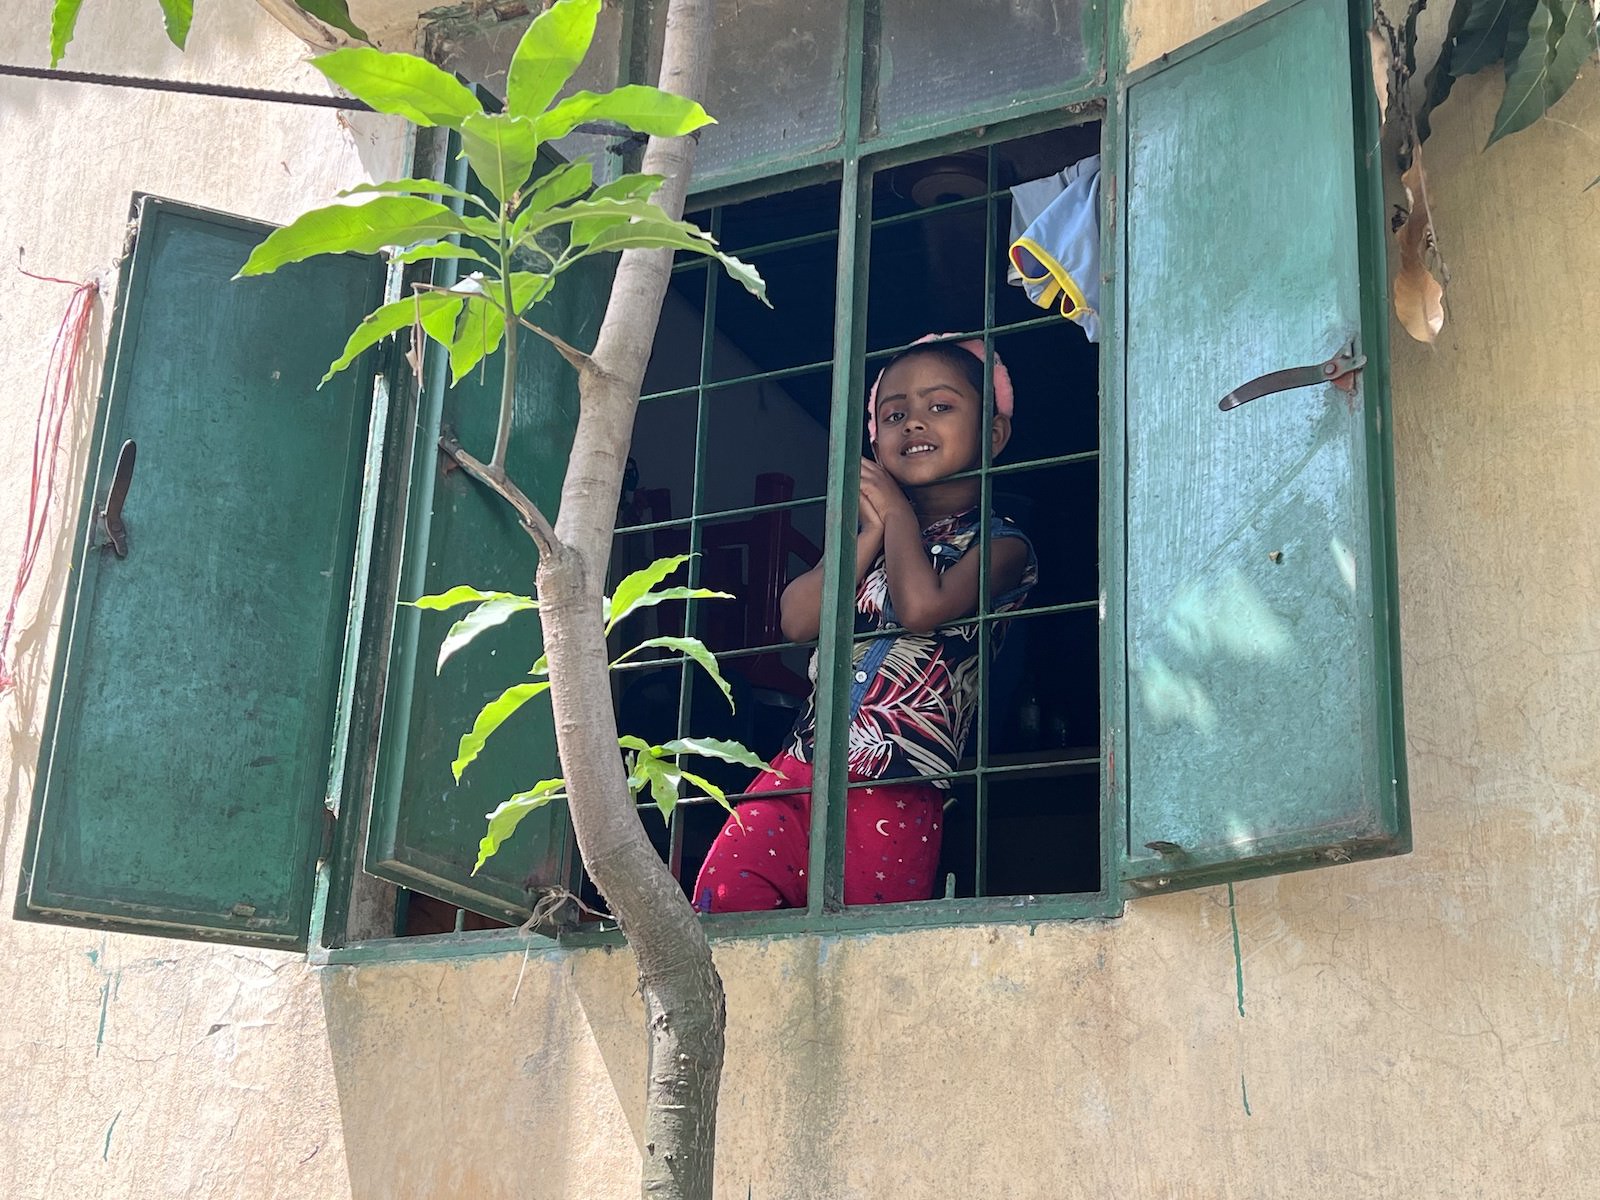 A young girl looks out from a grated window lined with green wooden shutters. A tree grows in front of the window.